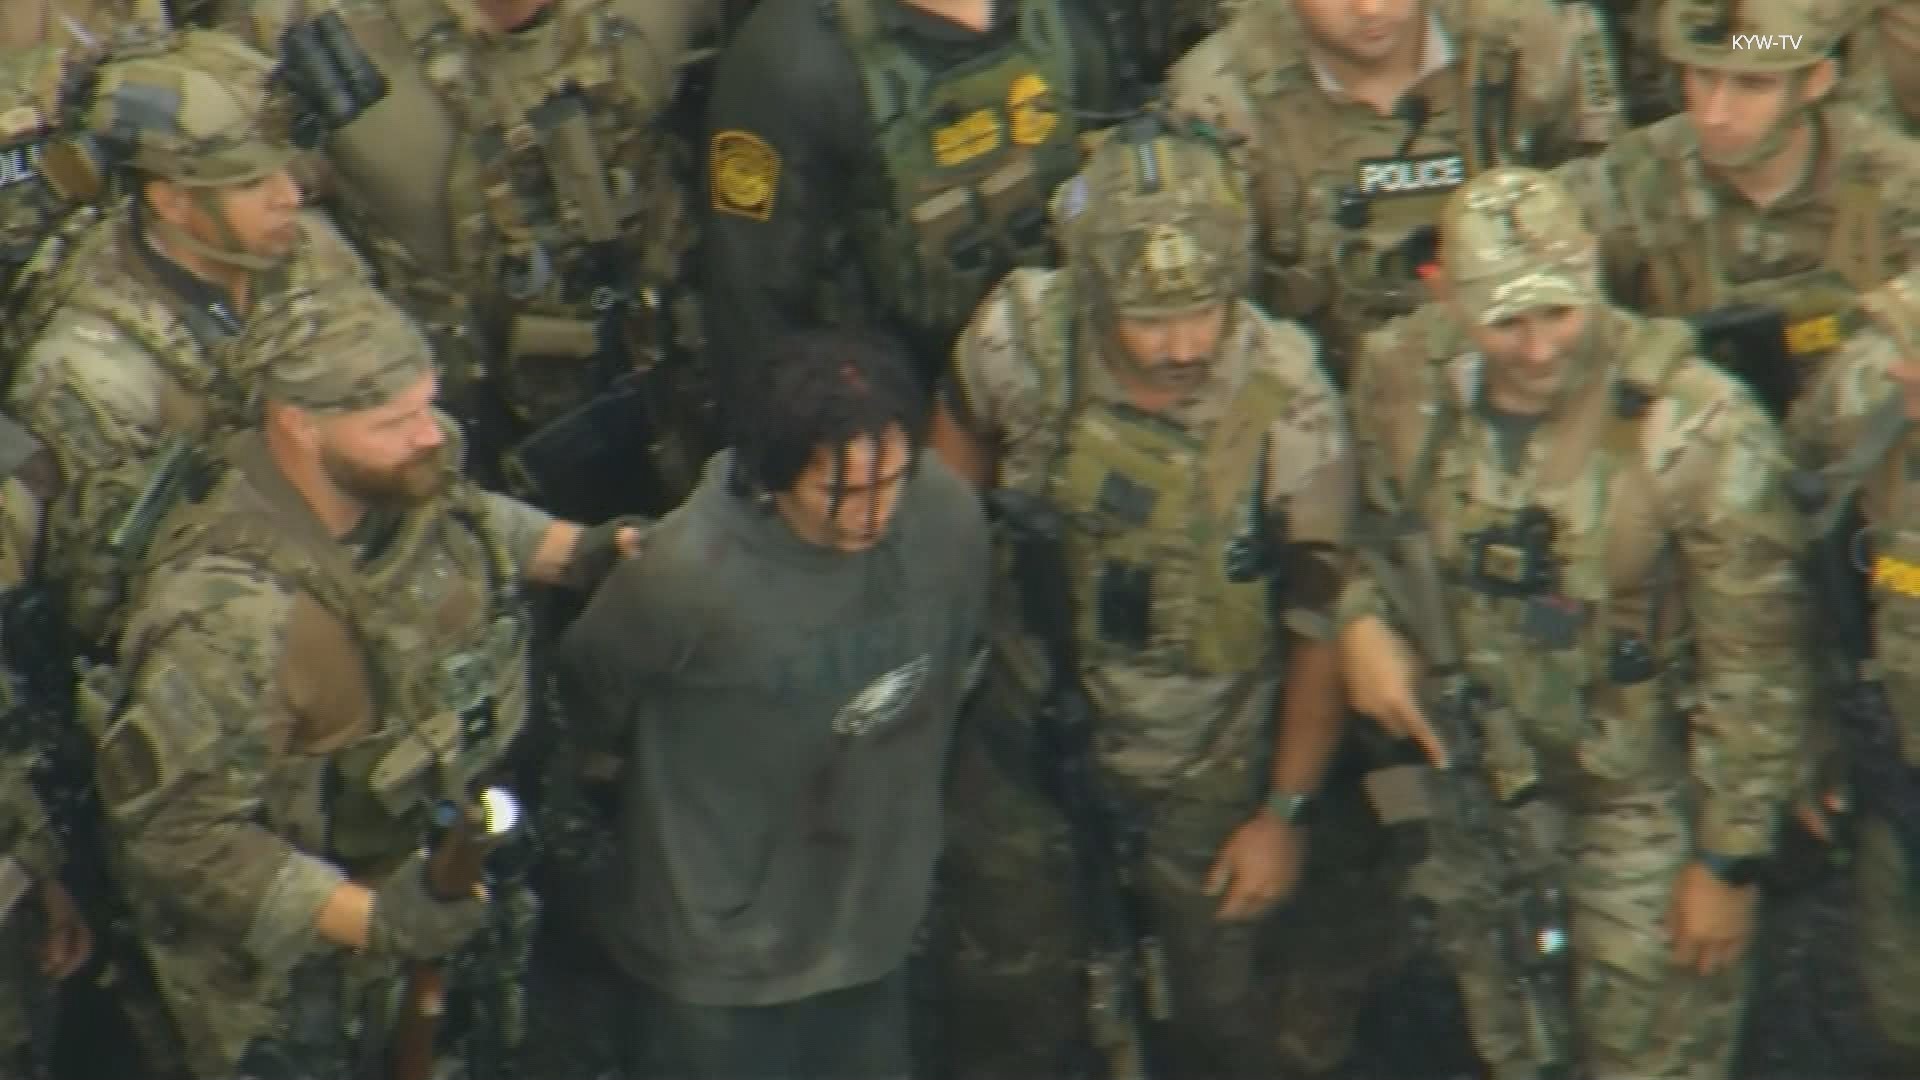 Pennsylvania police say escaped murderer Danelo Souza Cavalcante has been captured after nearly two weeks on the run.